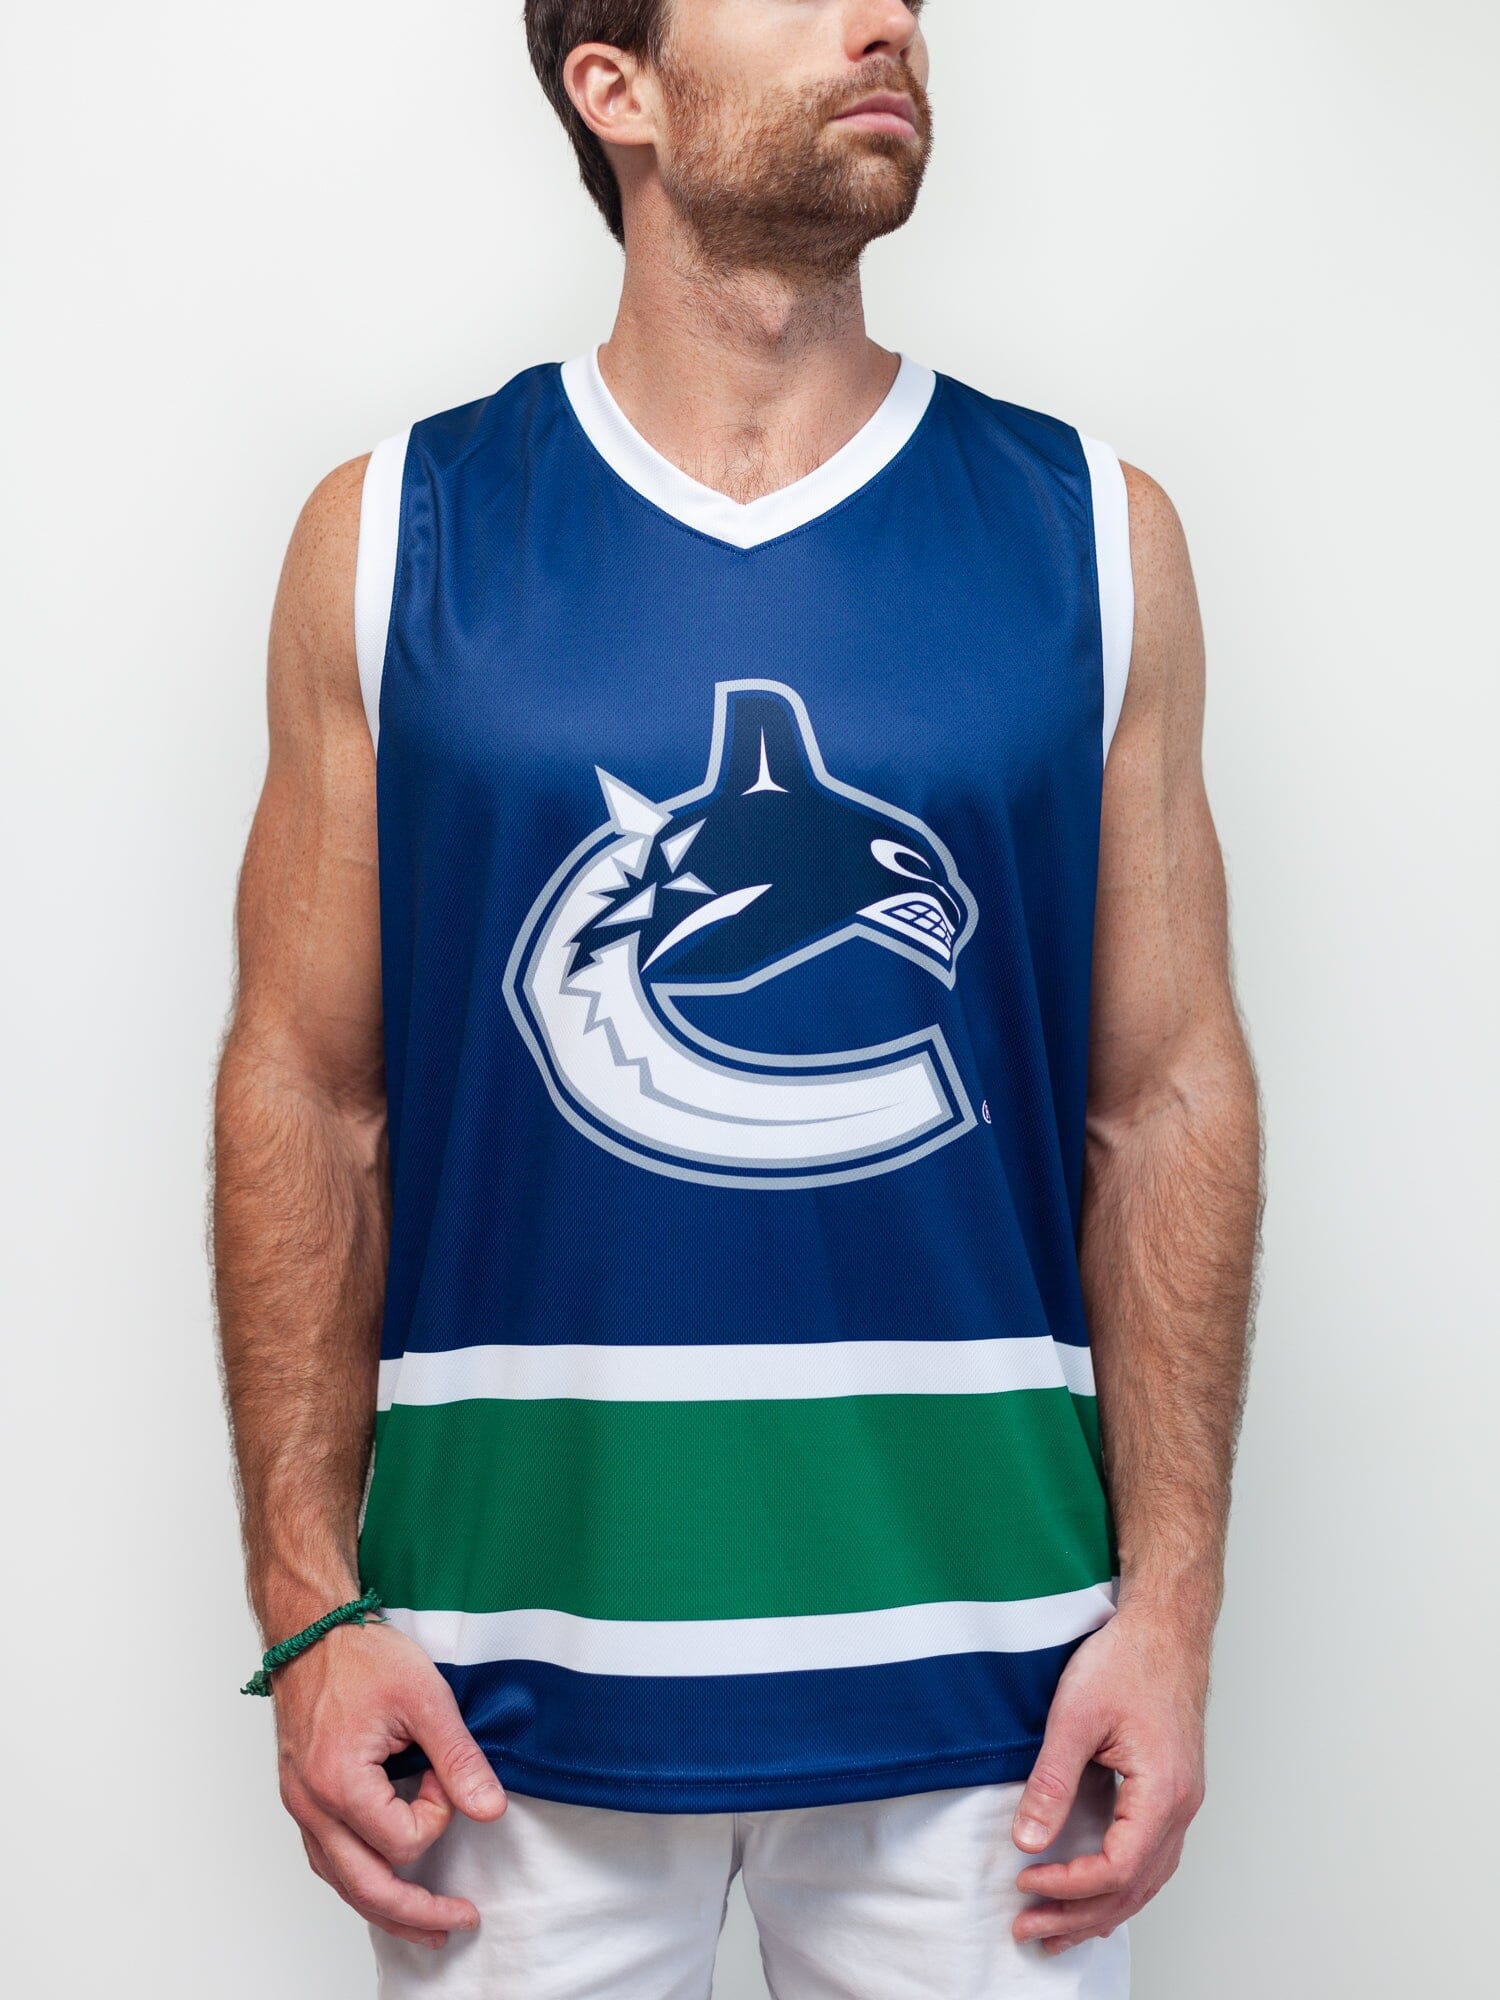 Should the Canucks make the Flying Skate throwbacks a full-time look?